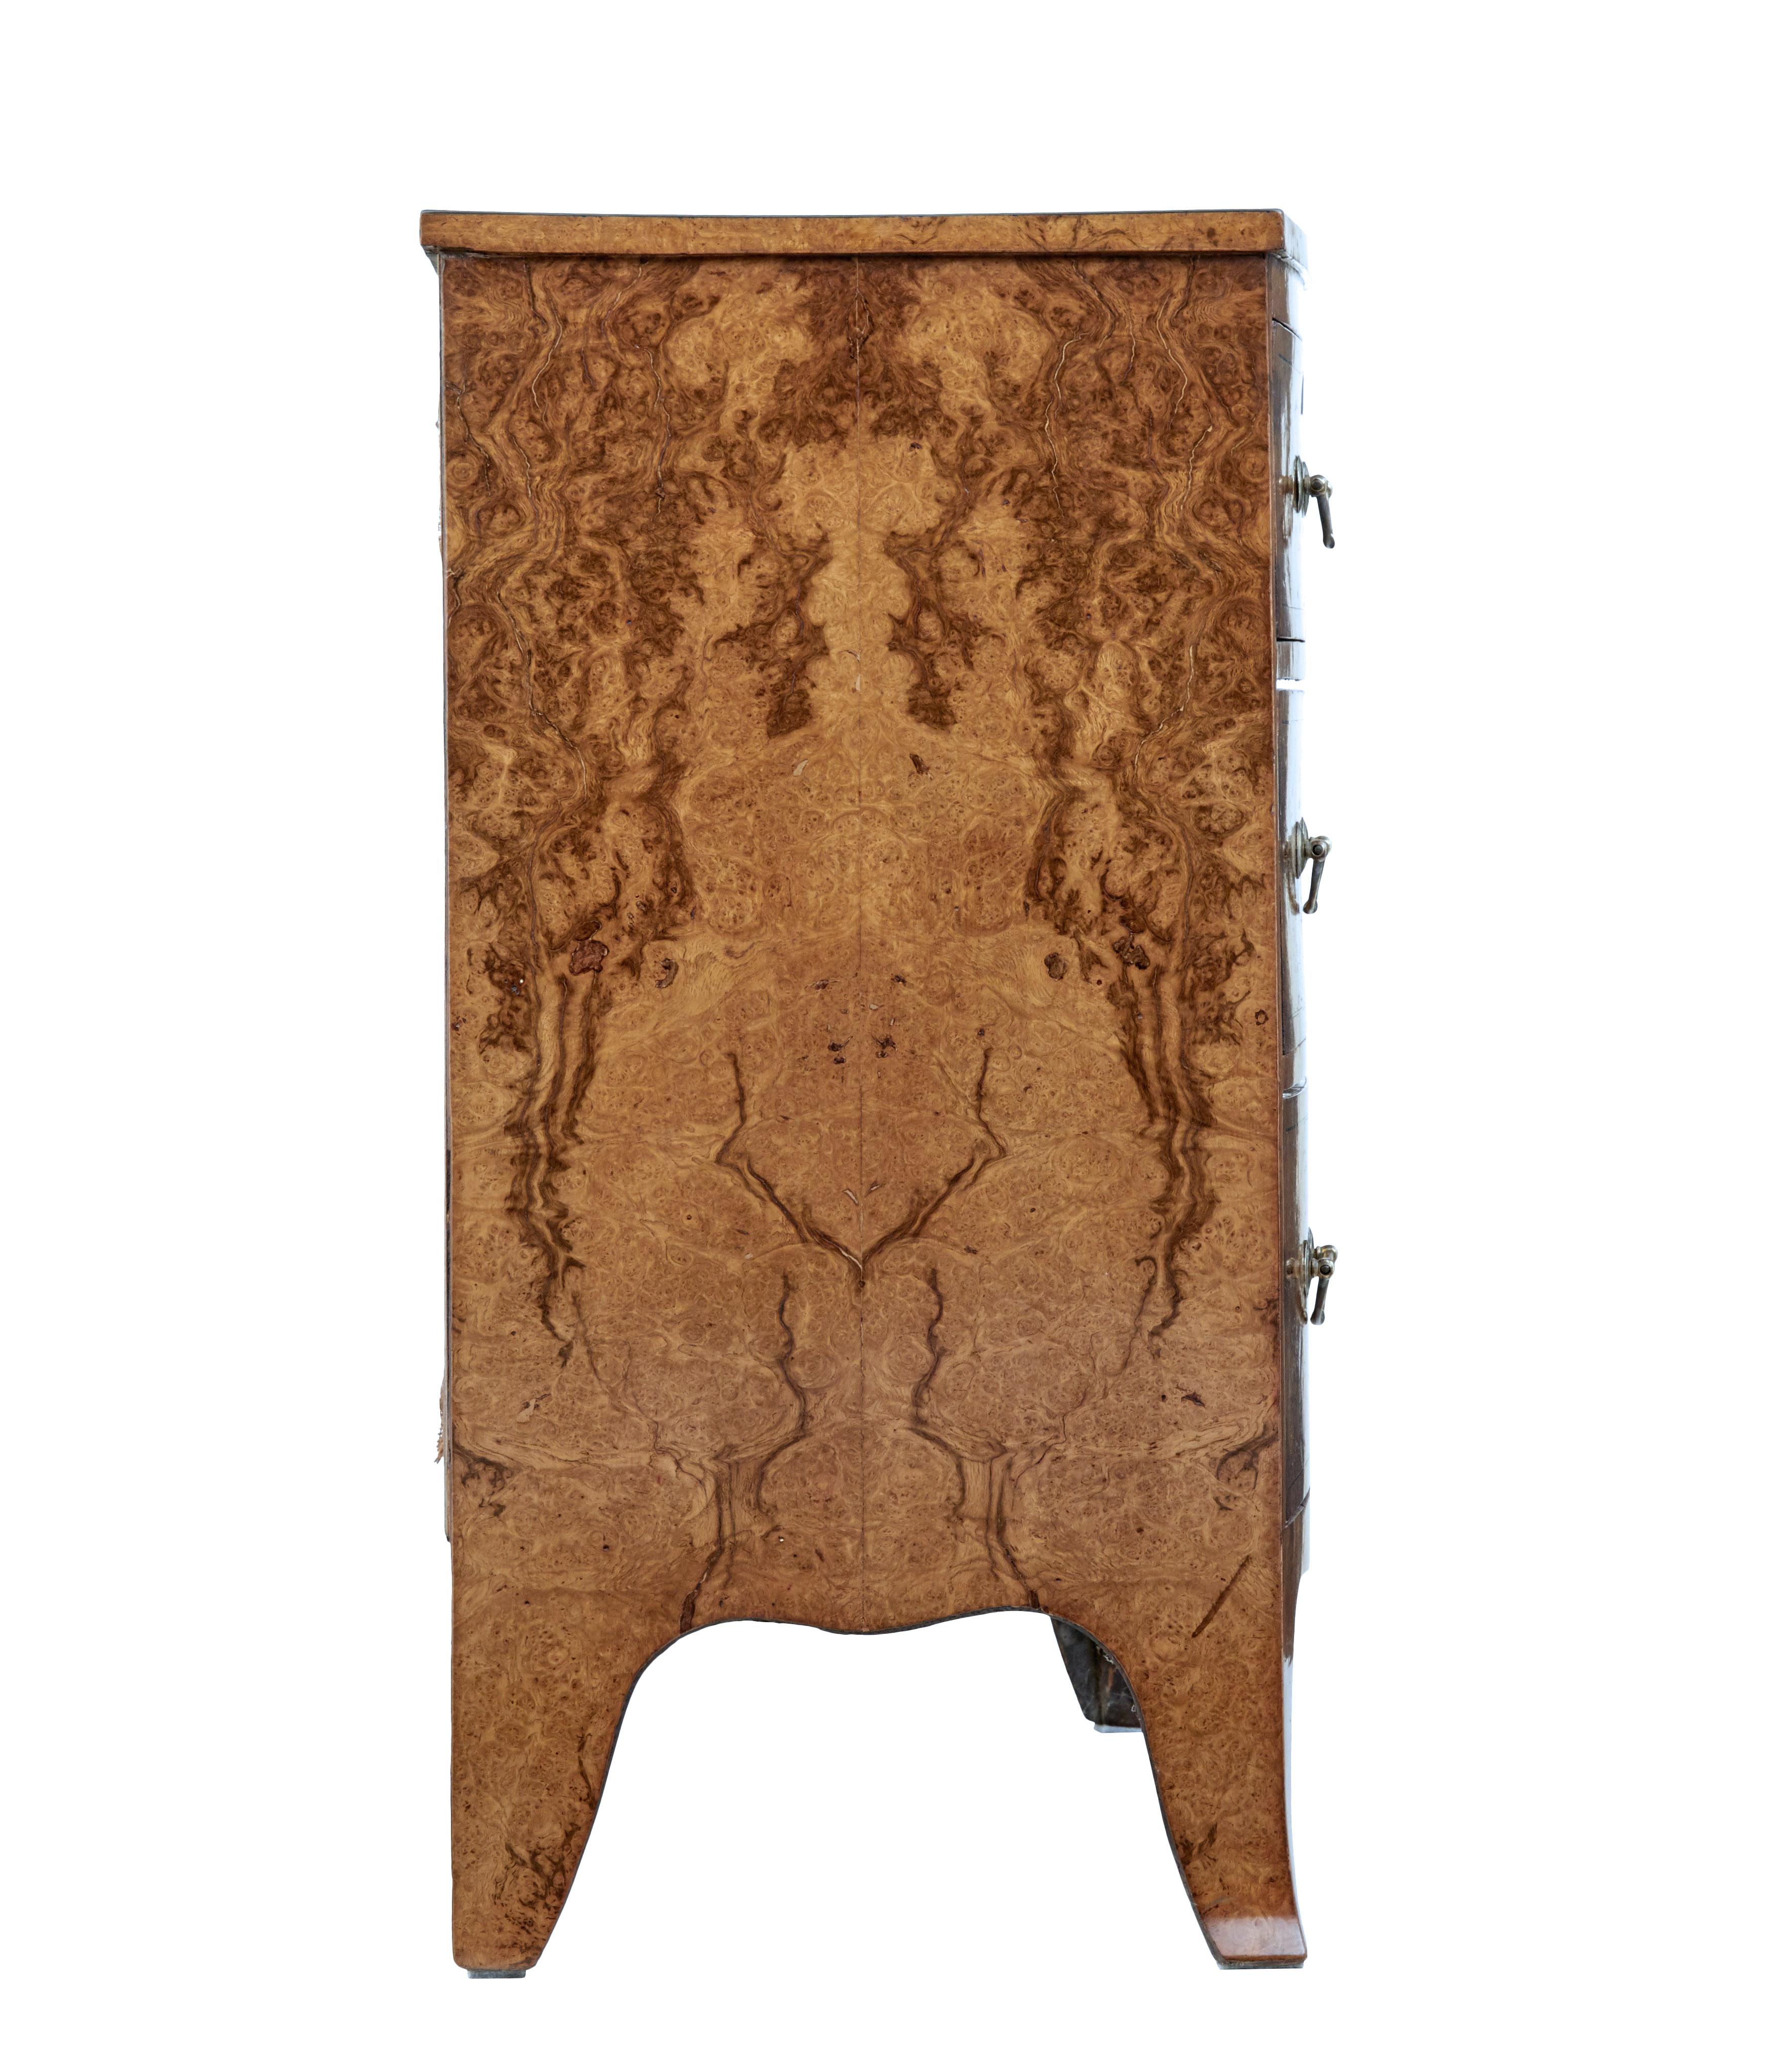 English Burr Walnut Bow Front Chest of Drawers circa 1870 with Bookmatch Veneer For Sale 3